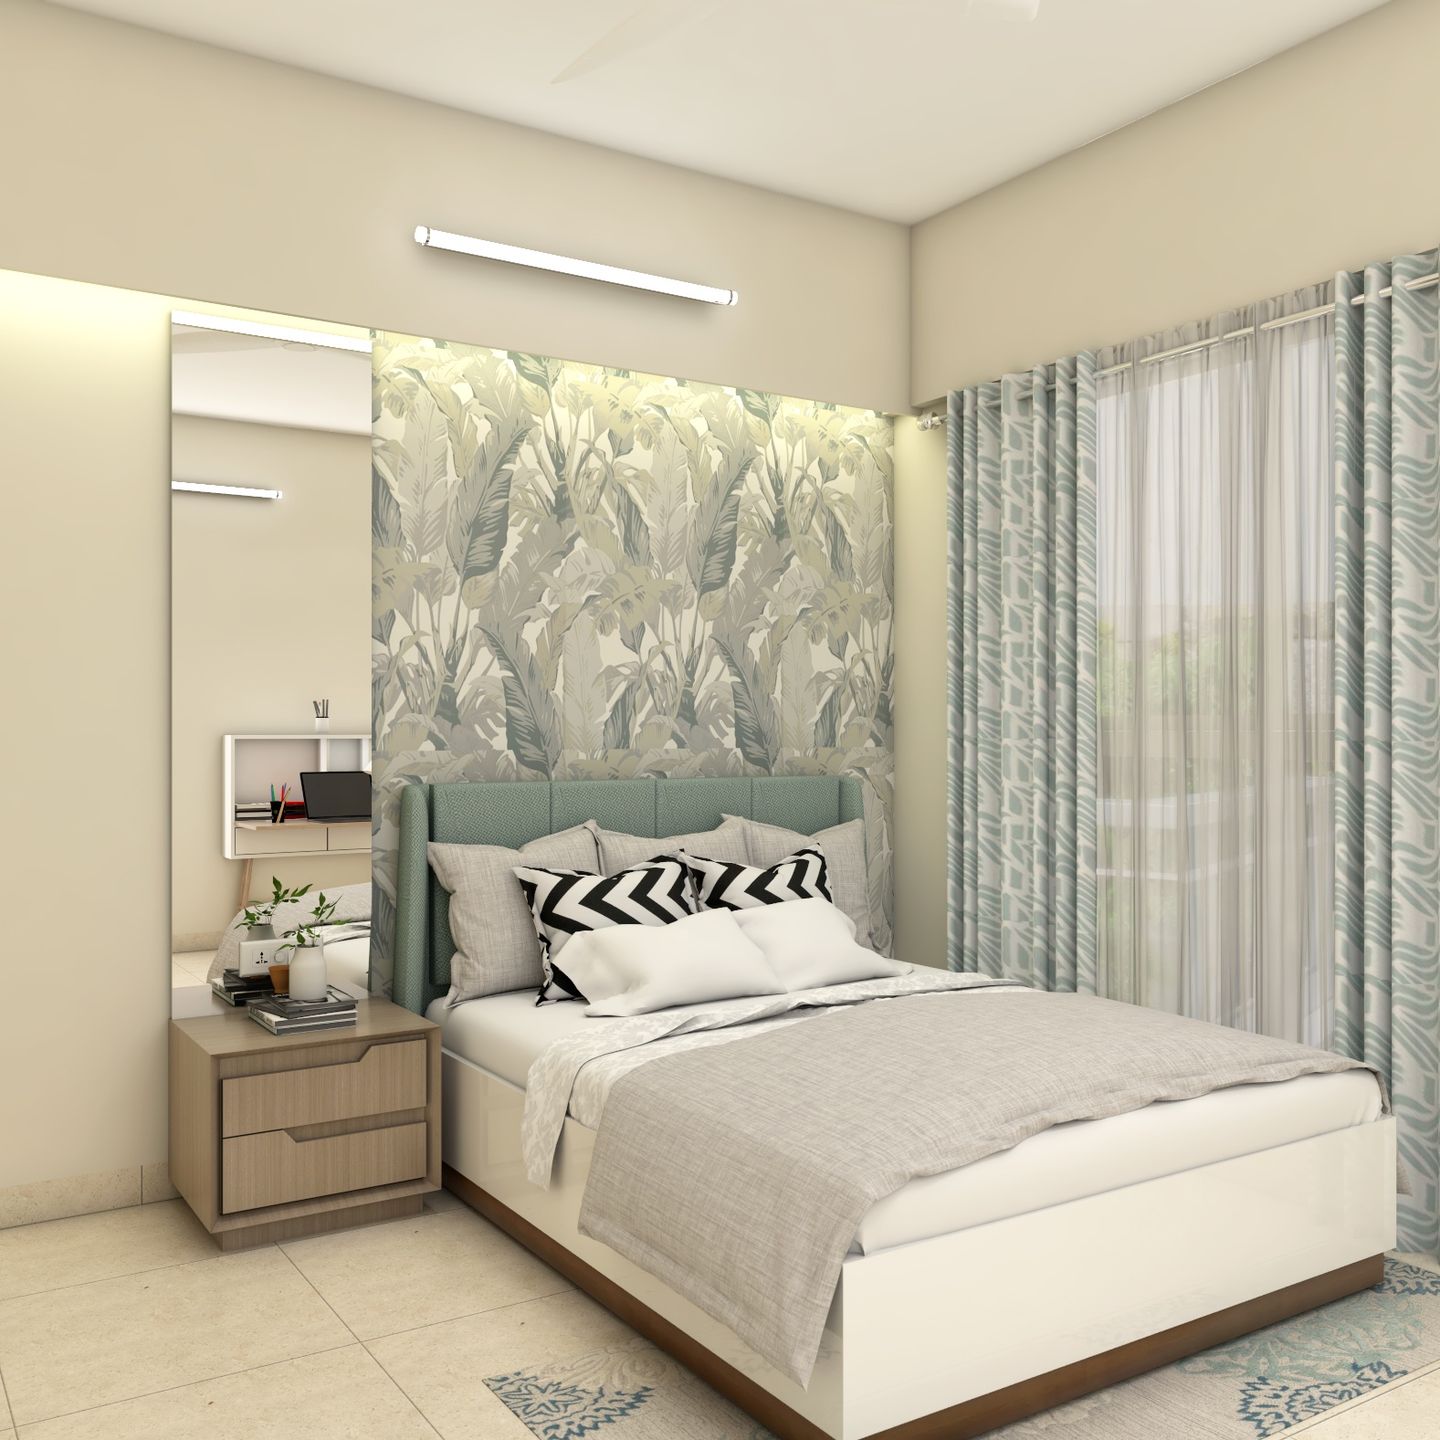 Contemporary Guest Room Design With Pastel Green And Grey Themes